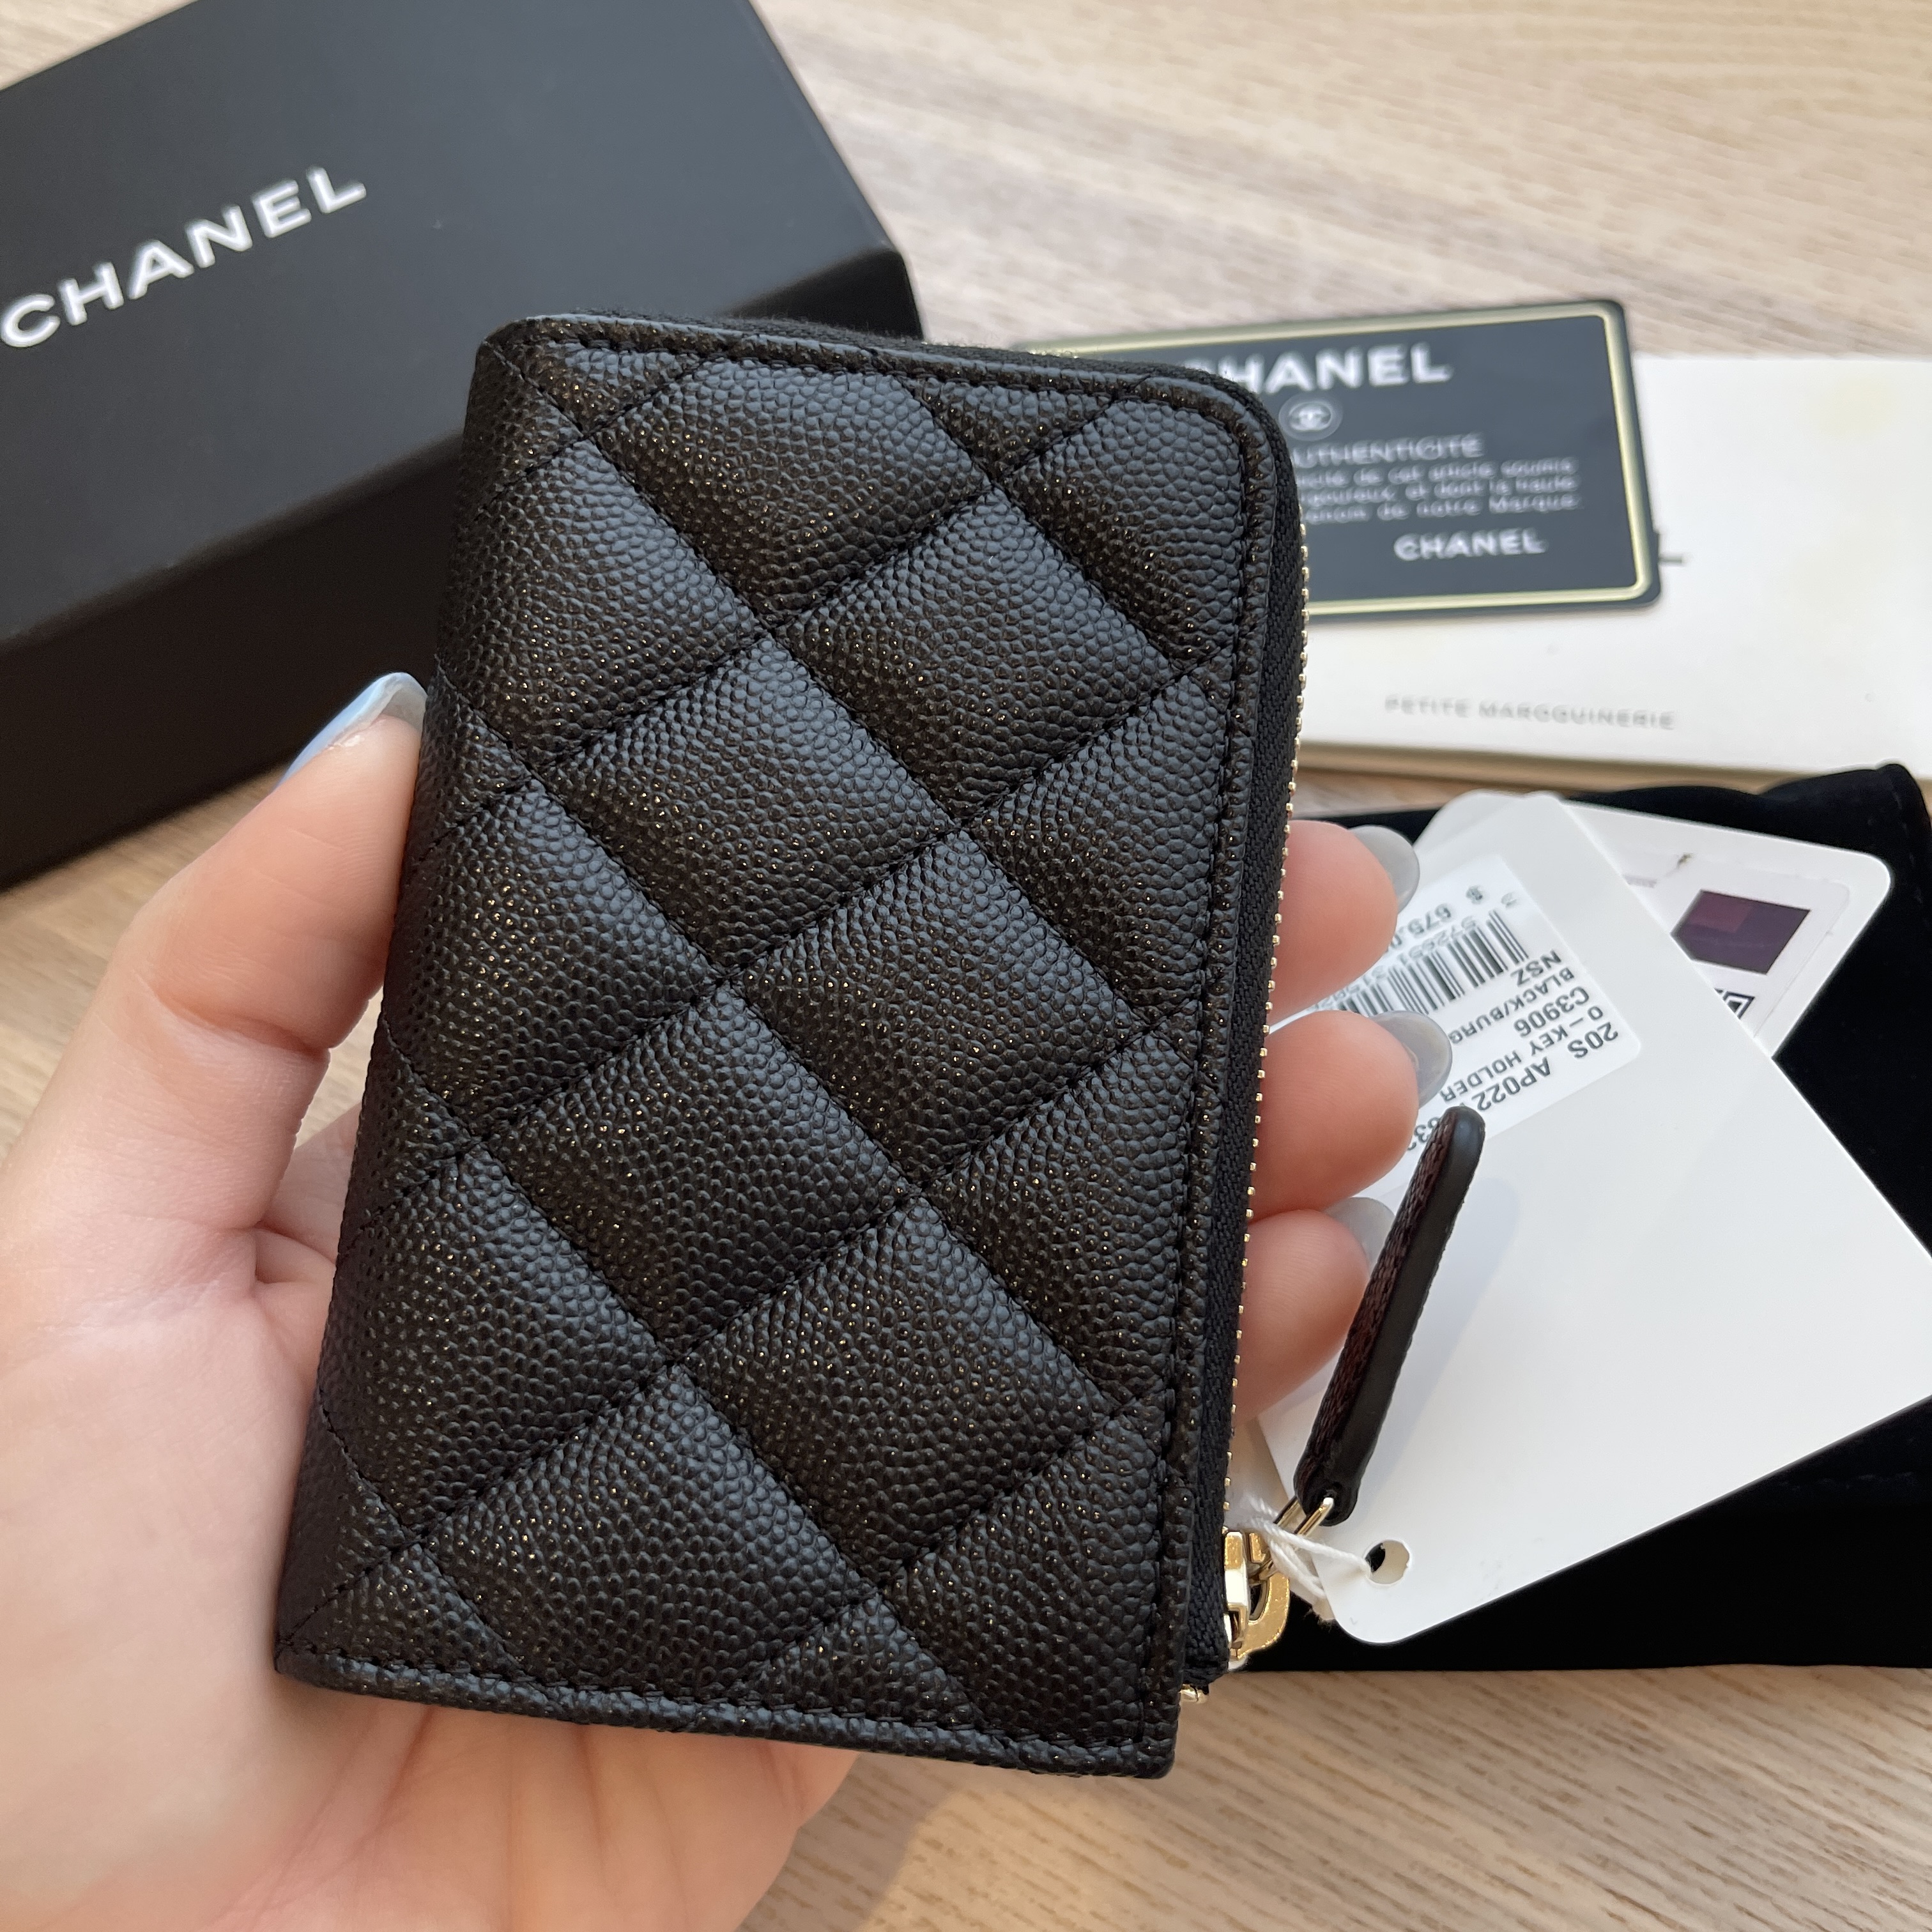 Chanel So Black Key Pouch – Beccas Bags